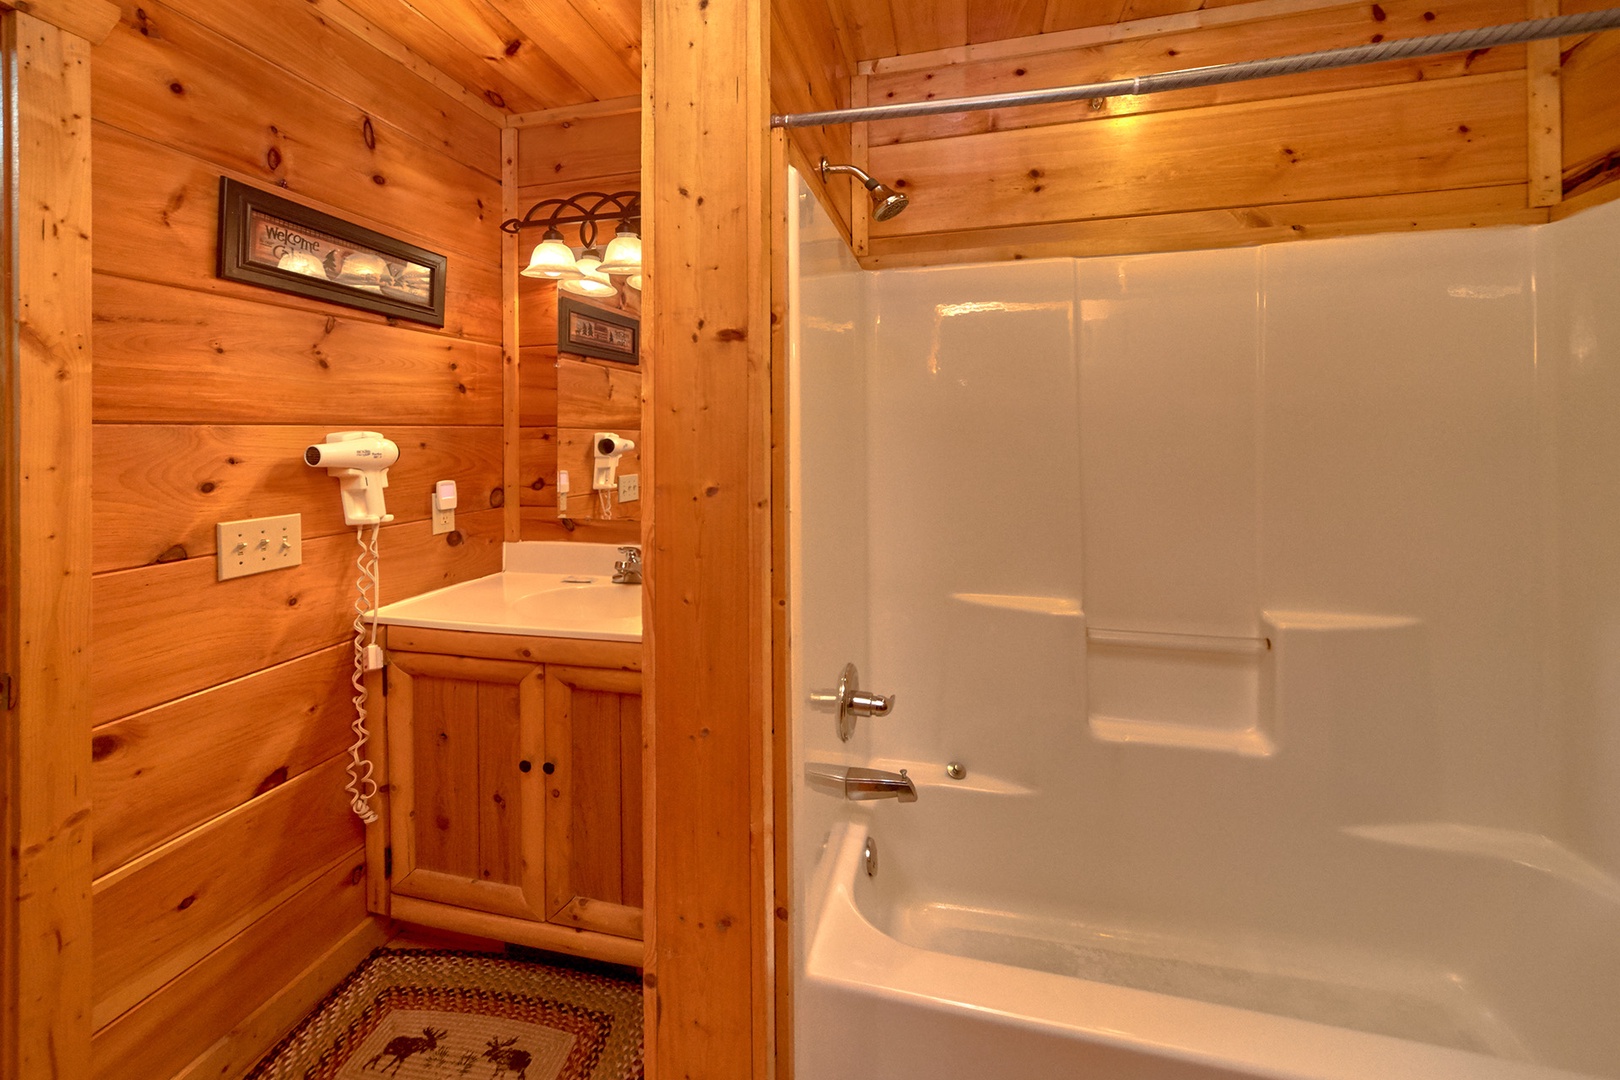 Bathroom with a tub and shower at Love Struck, a 1 bedroom cabin rental located in Pigeon Forge